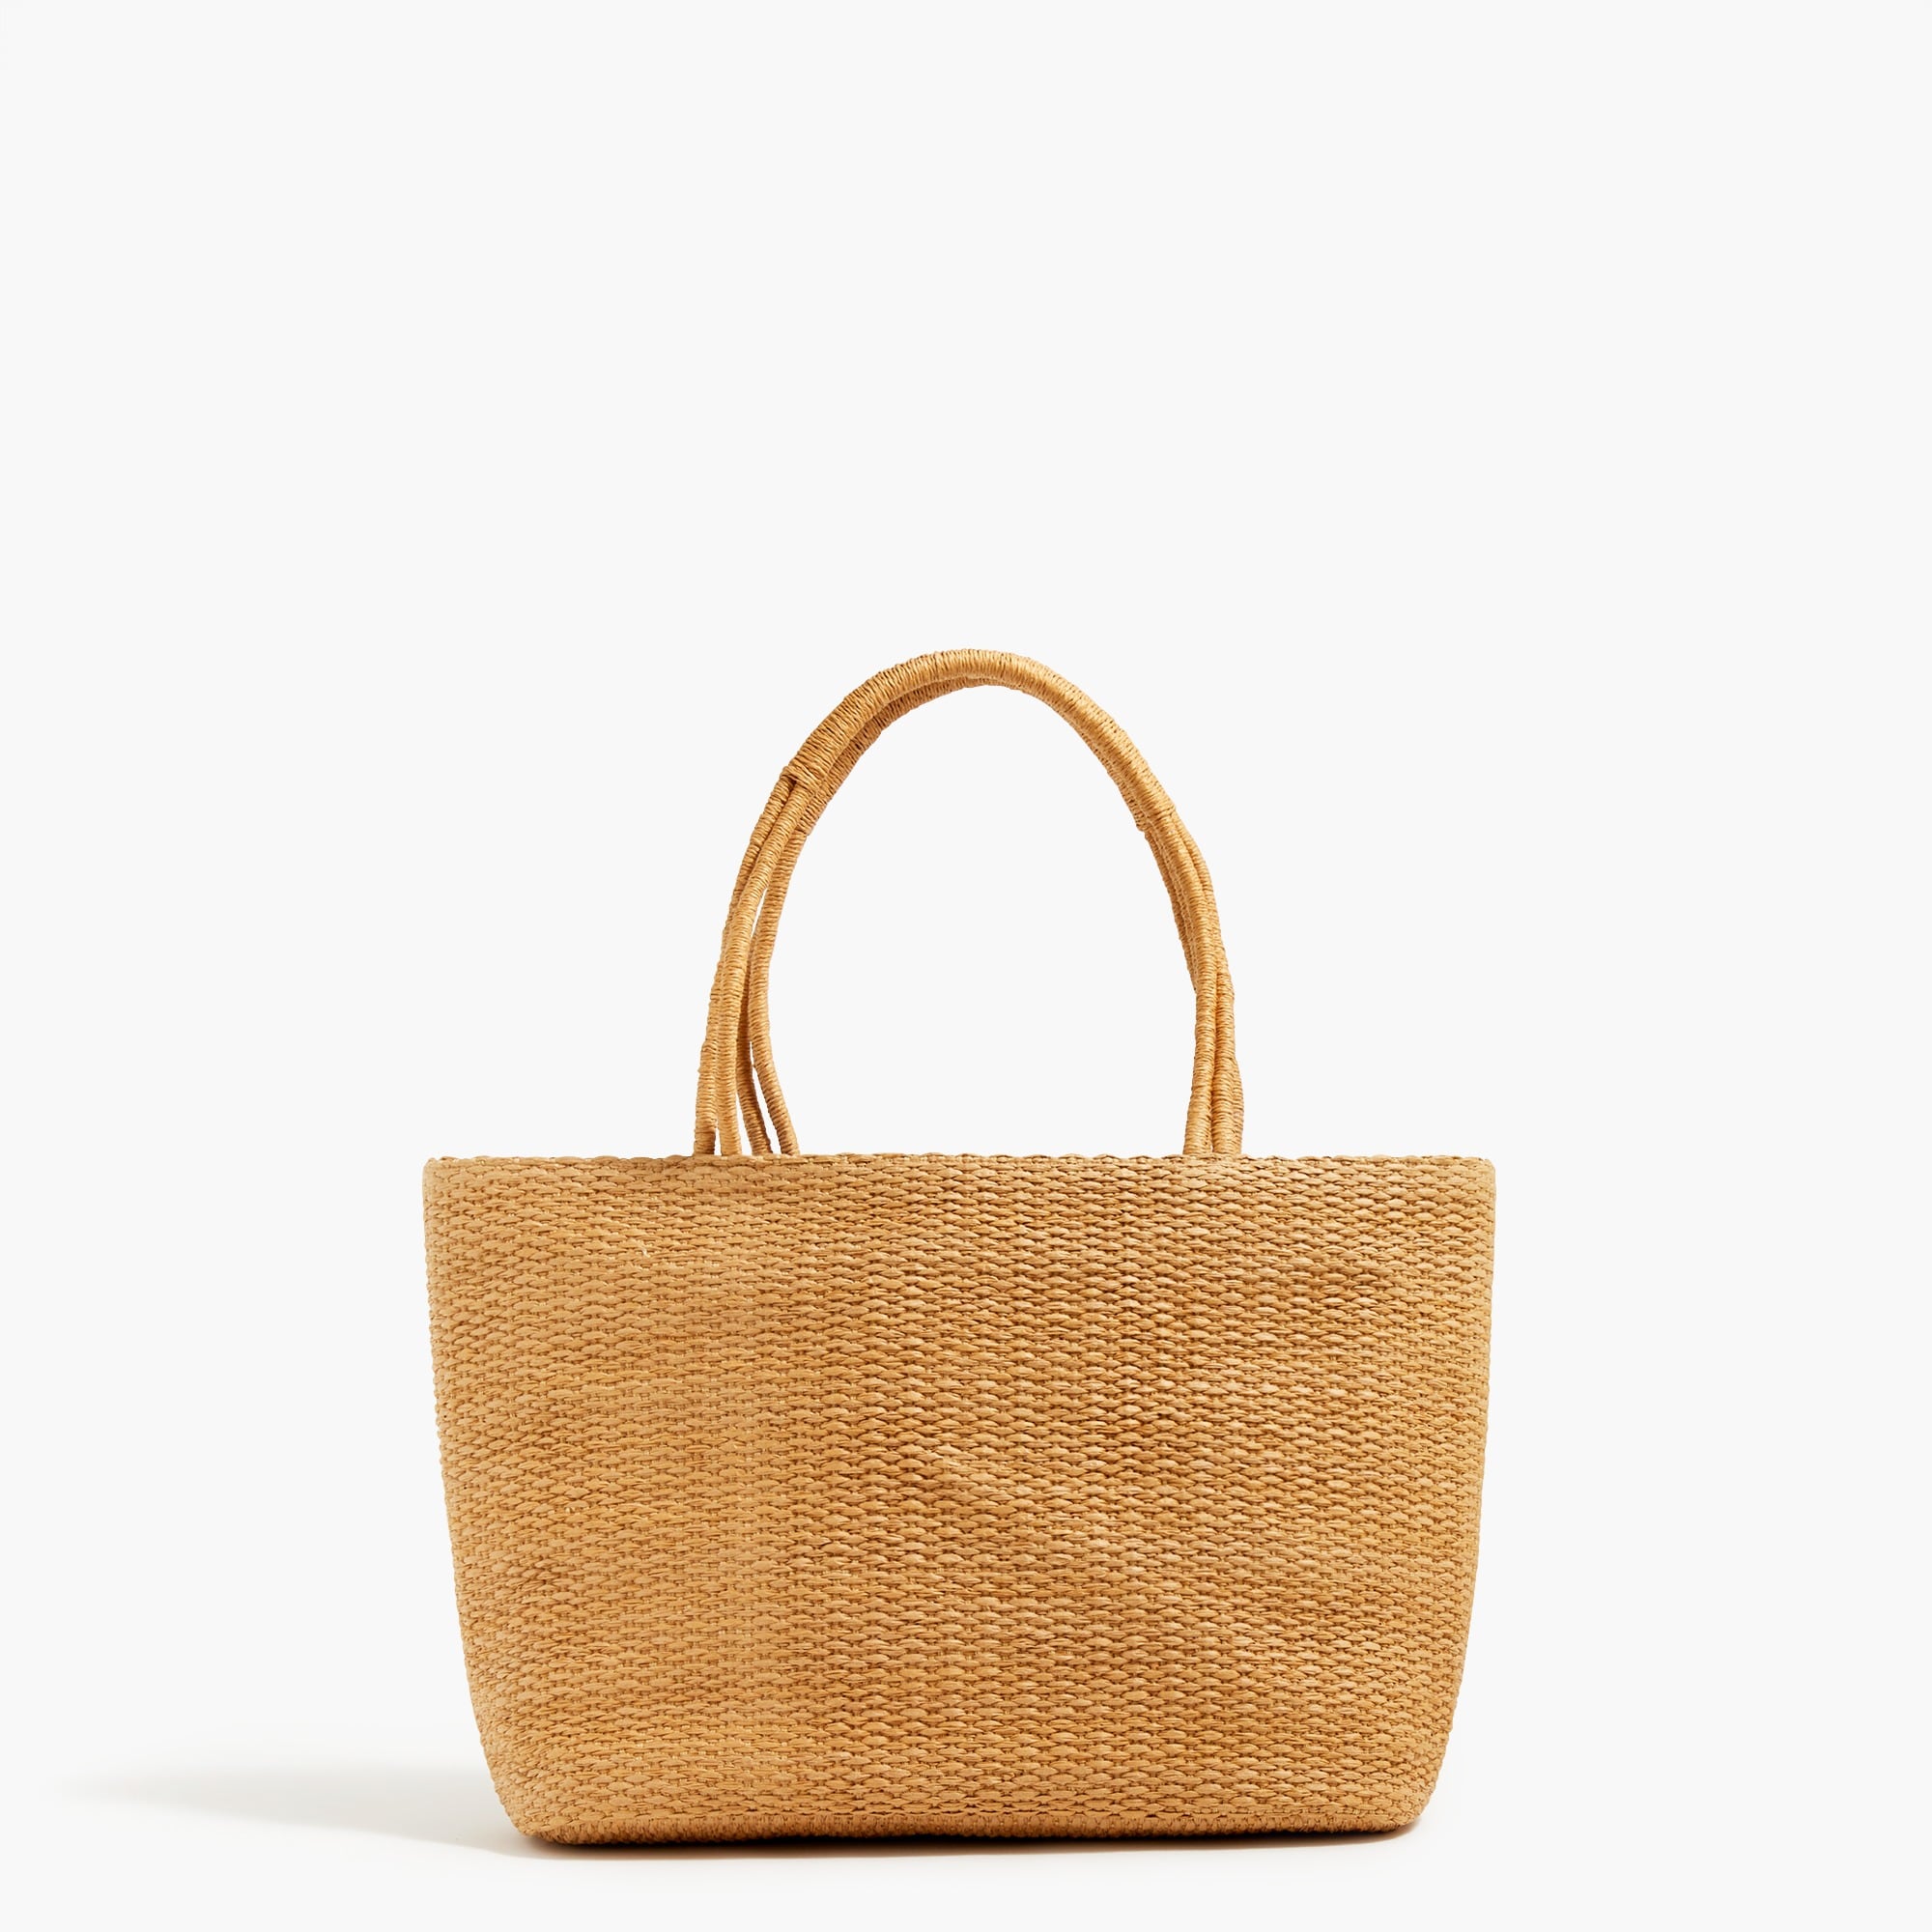 Rejolly Women's Straw Tote Bag